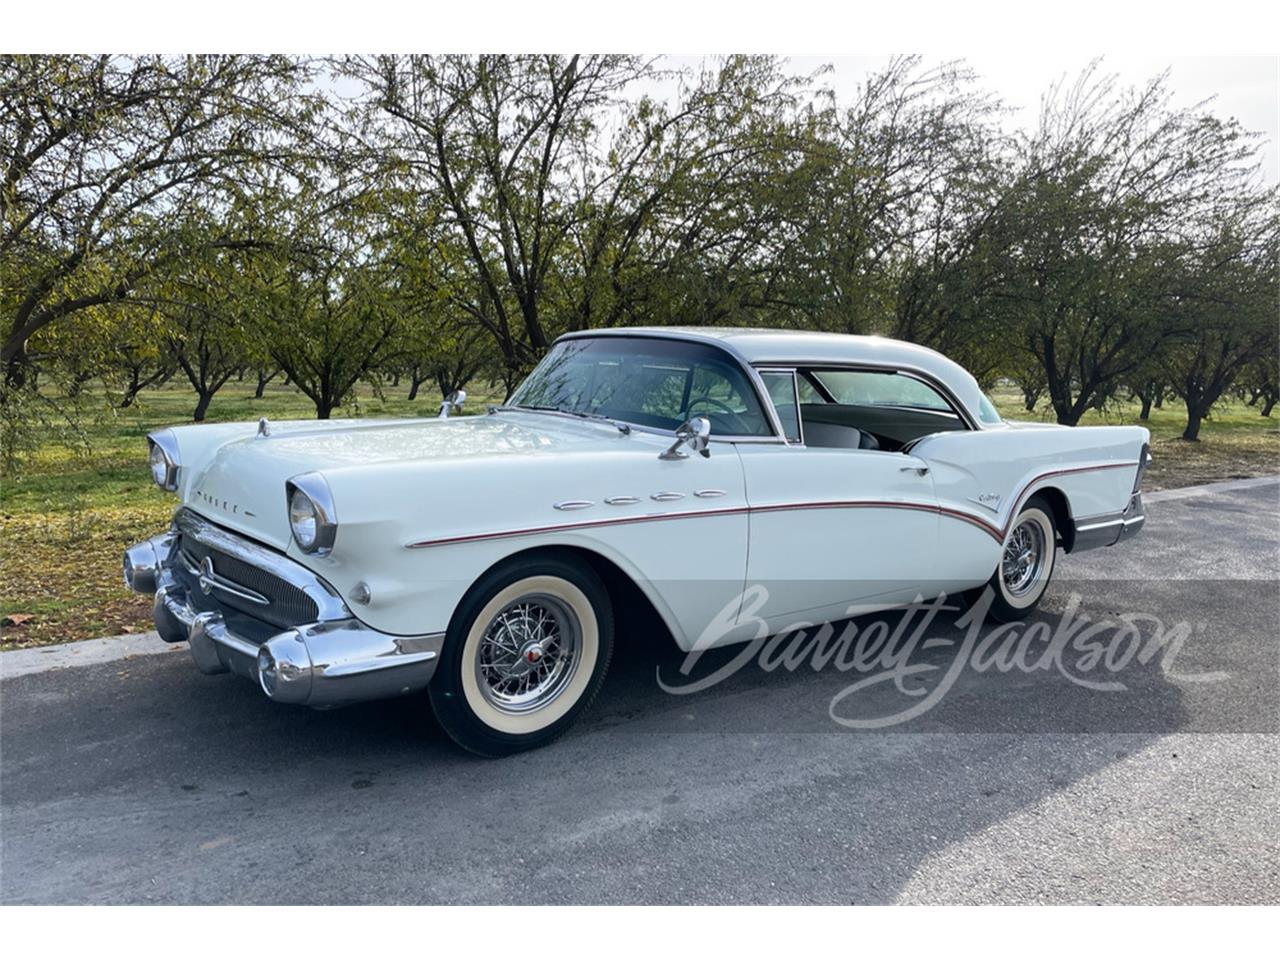 For Sale at Auction: 1957 Buick Century in Scottsdale, Arizona for sale in Scottsdale, AZ